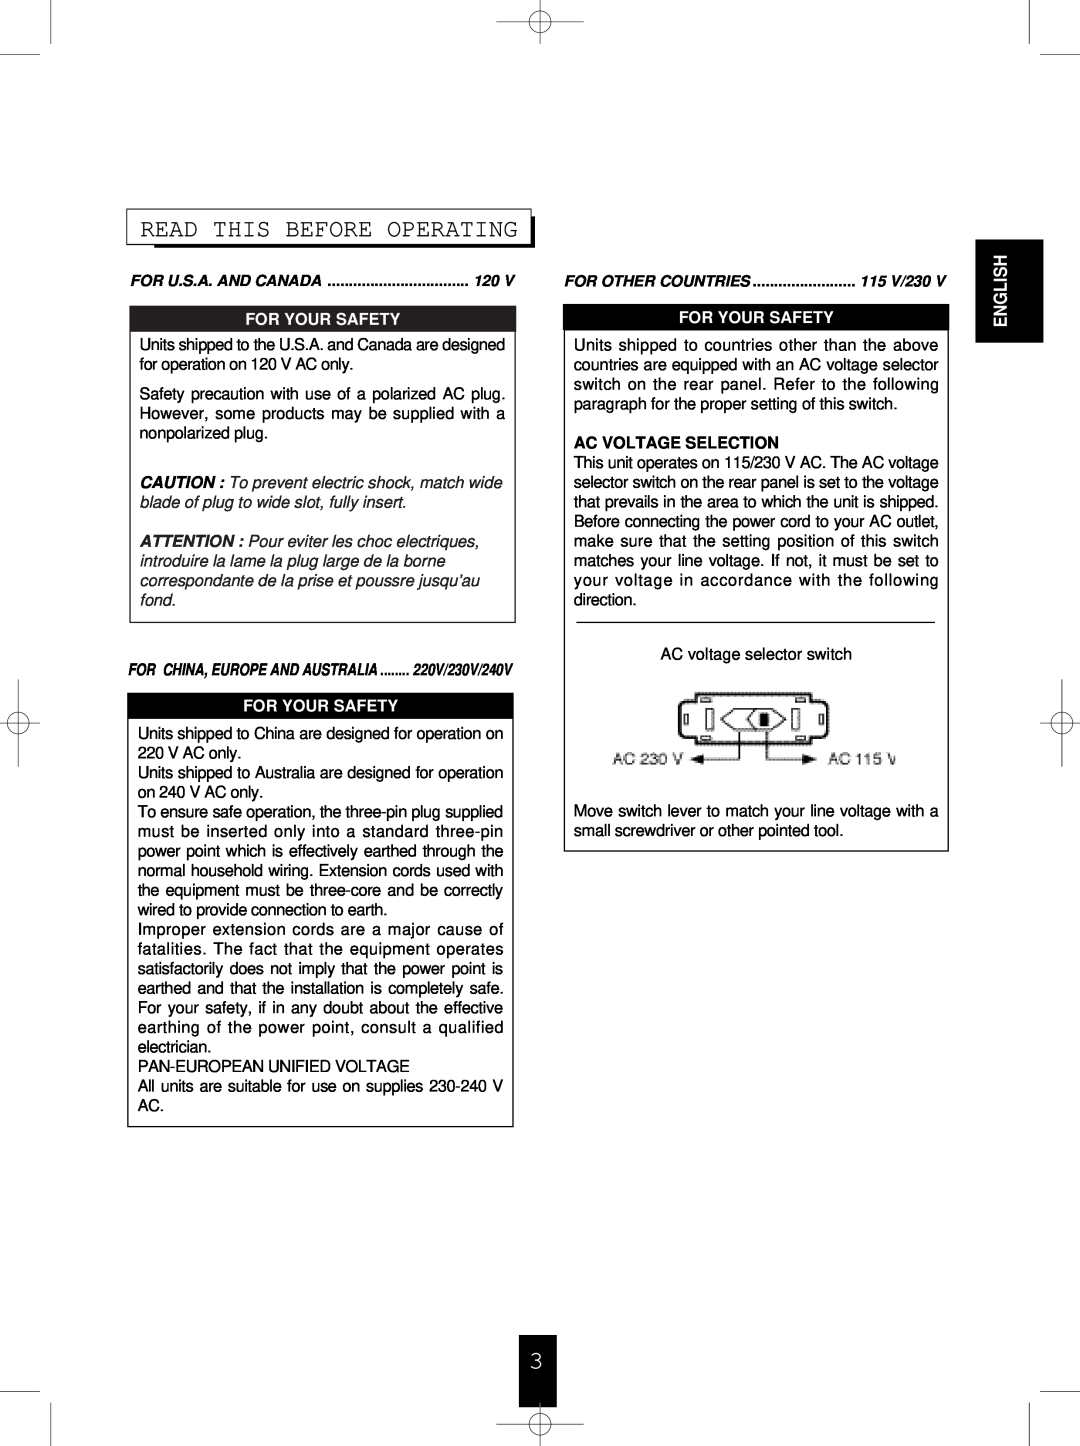 Sherwood RX-4100 manual Read This Before Operating, For Your Safety, Ac Voltage Selection, English 